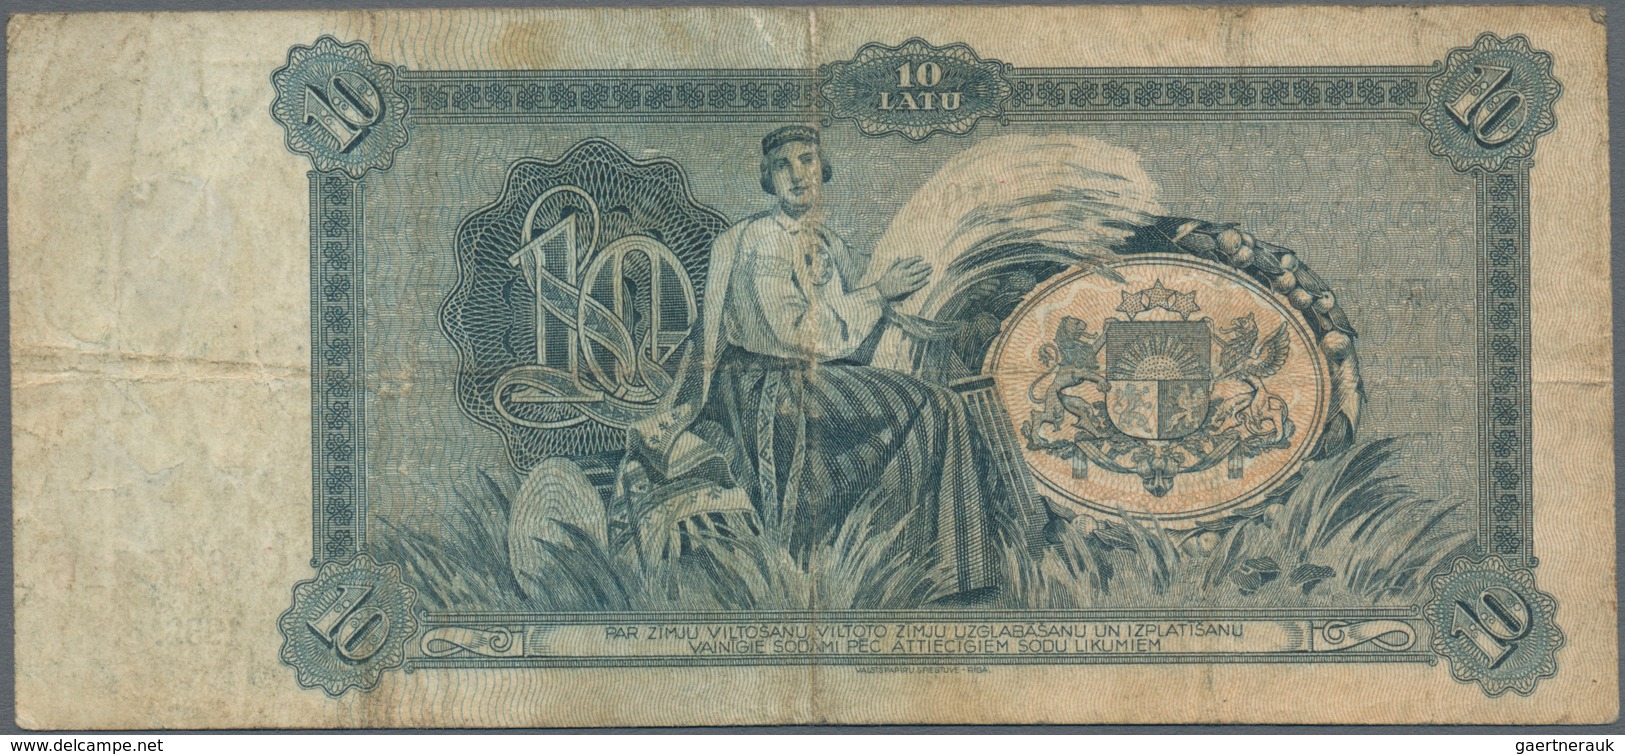 Latvia / Lettland: Set Of 2 Notes Containing 10 Latu 1933 & 1934 P. 24a, 25f, Both Used With Folds A - Lettland